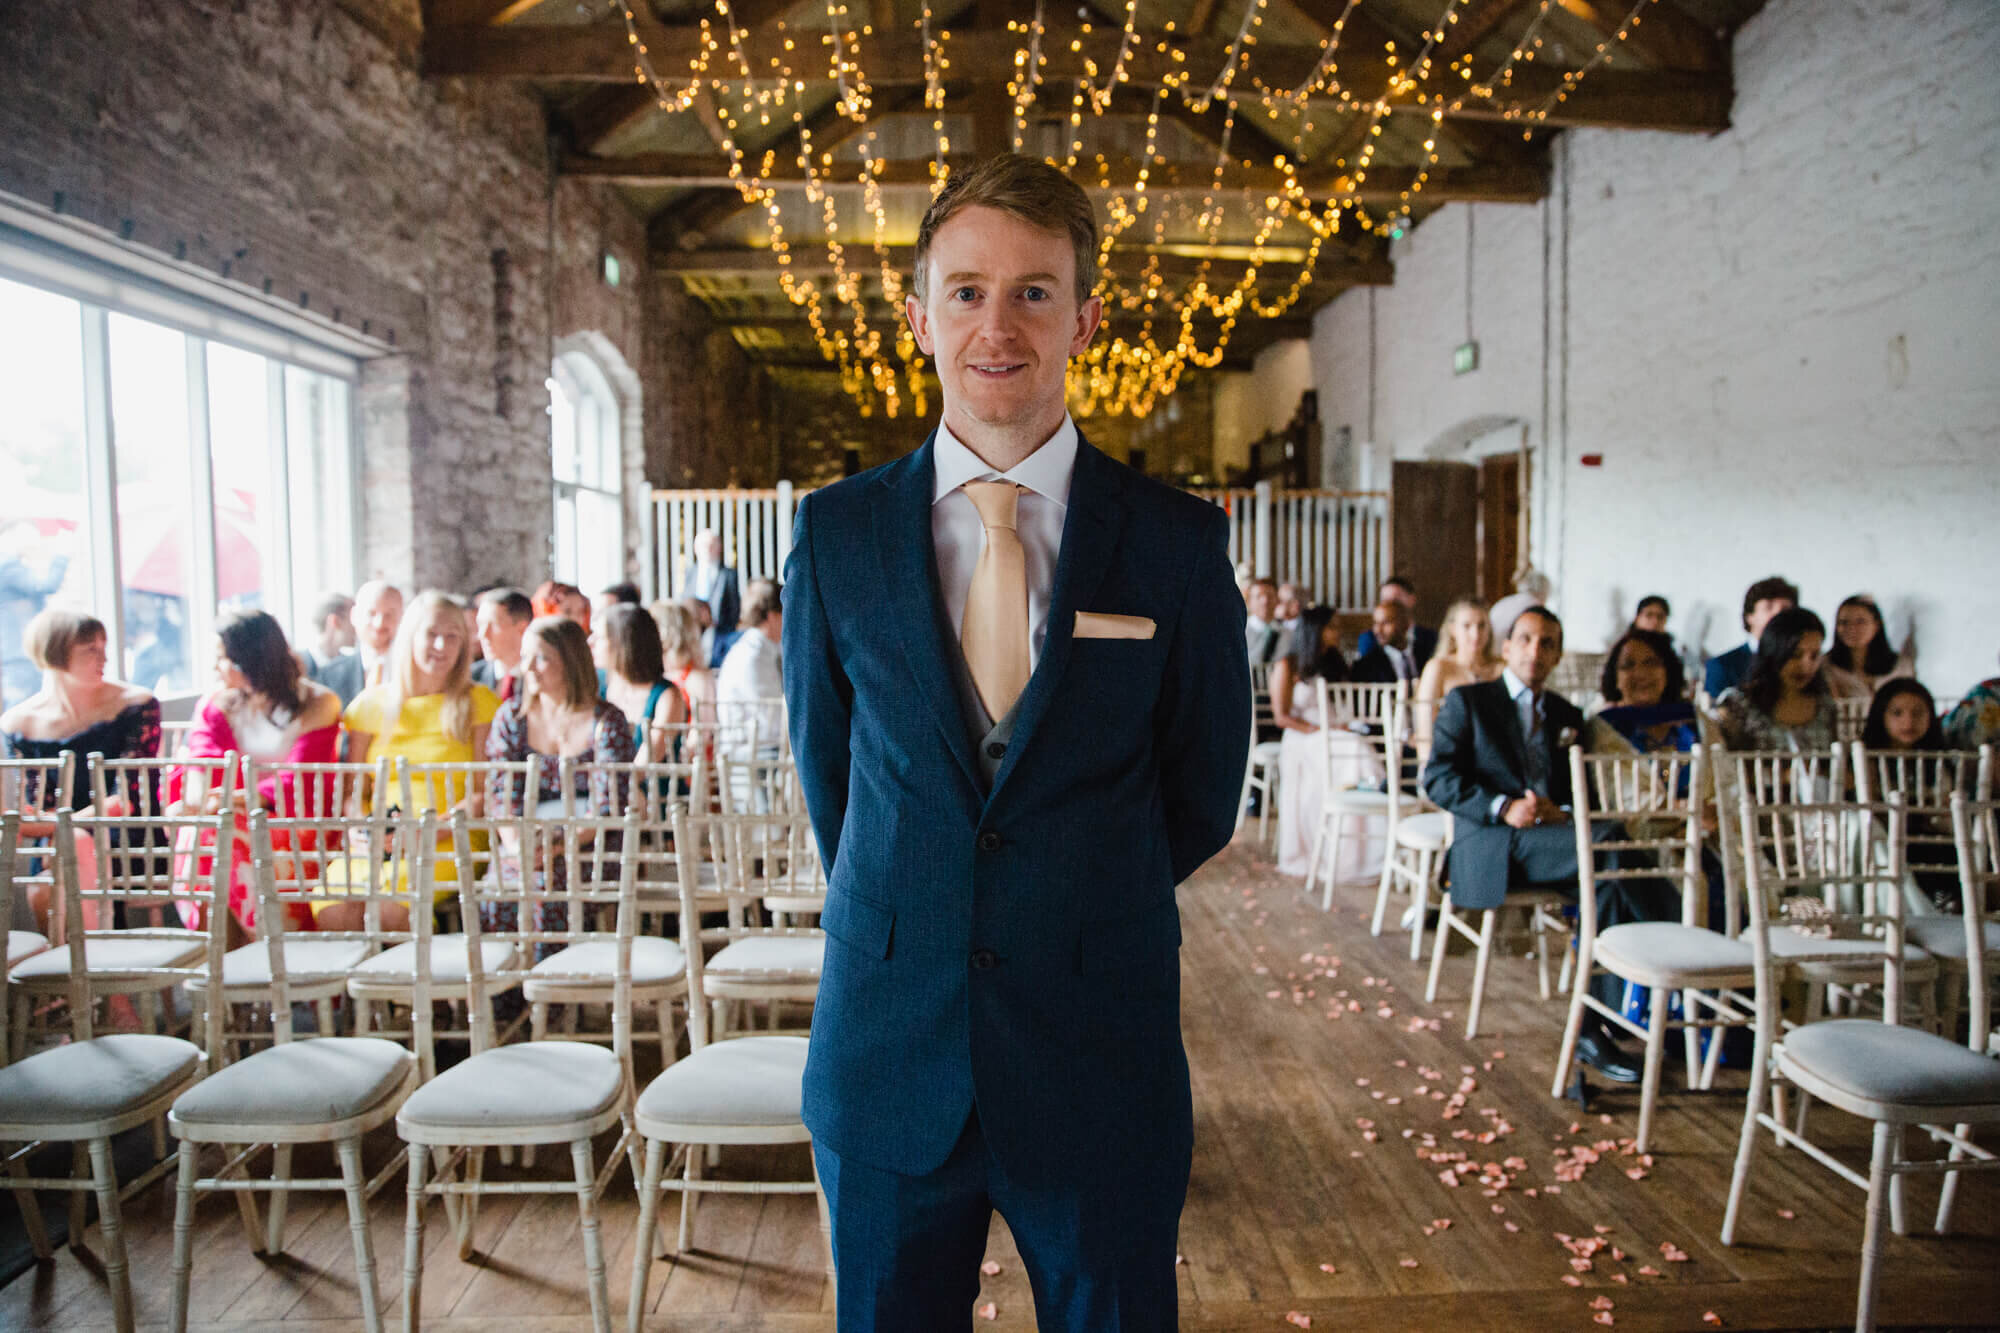 groom at top of aisle on exhibition as guests look on